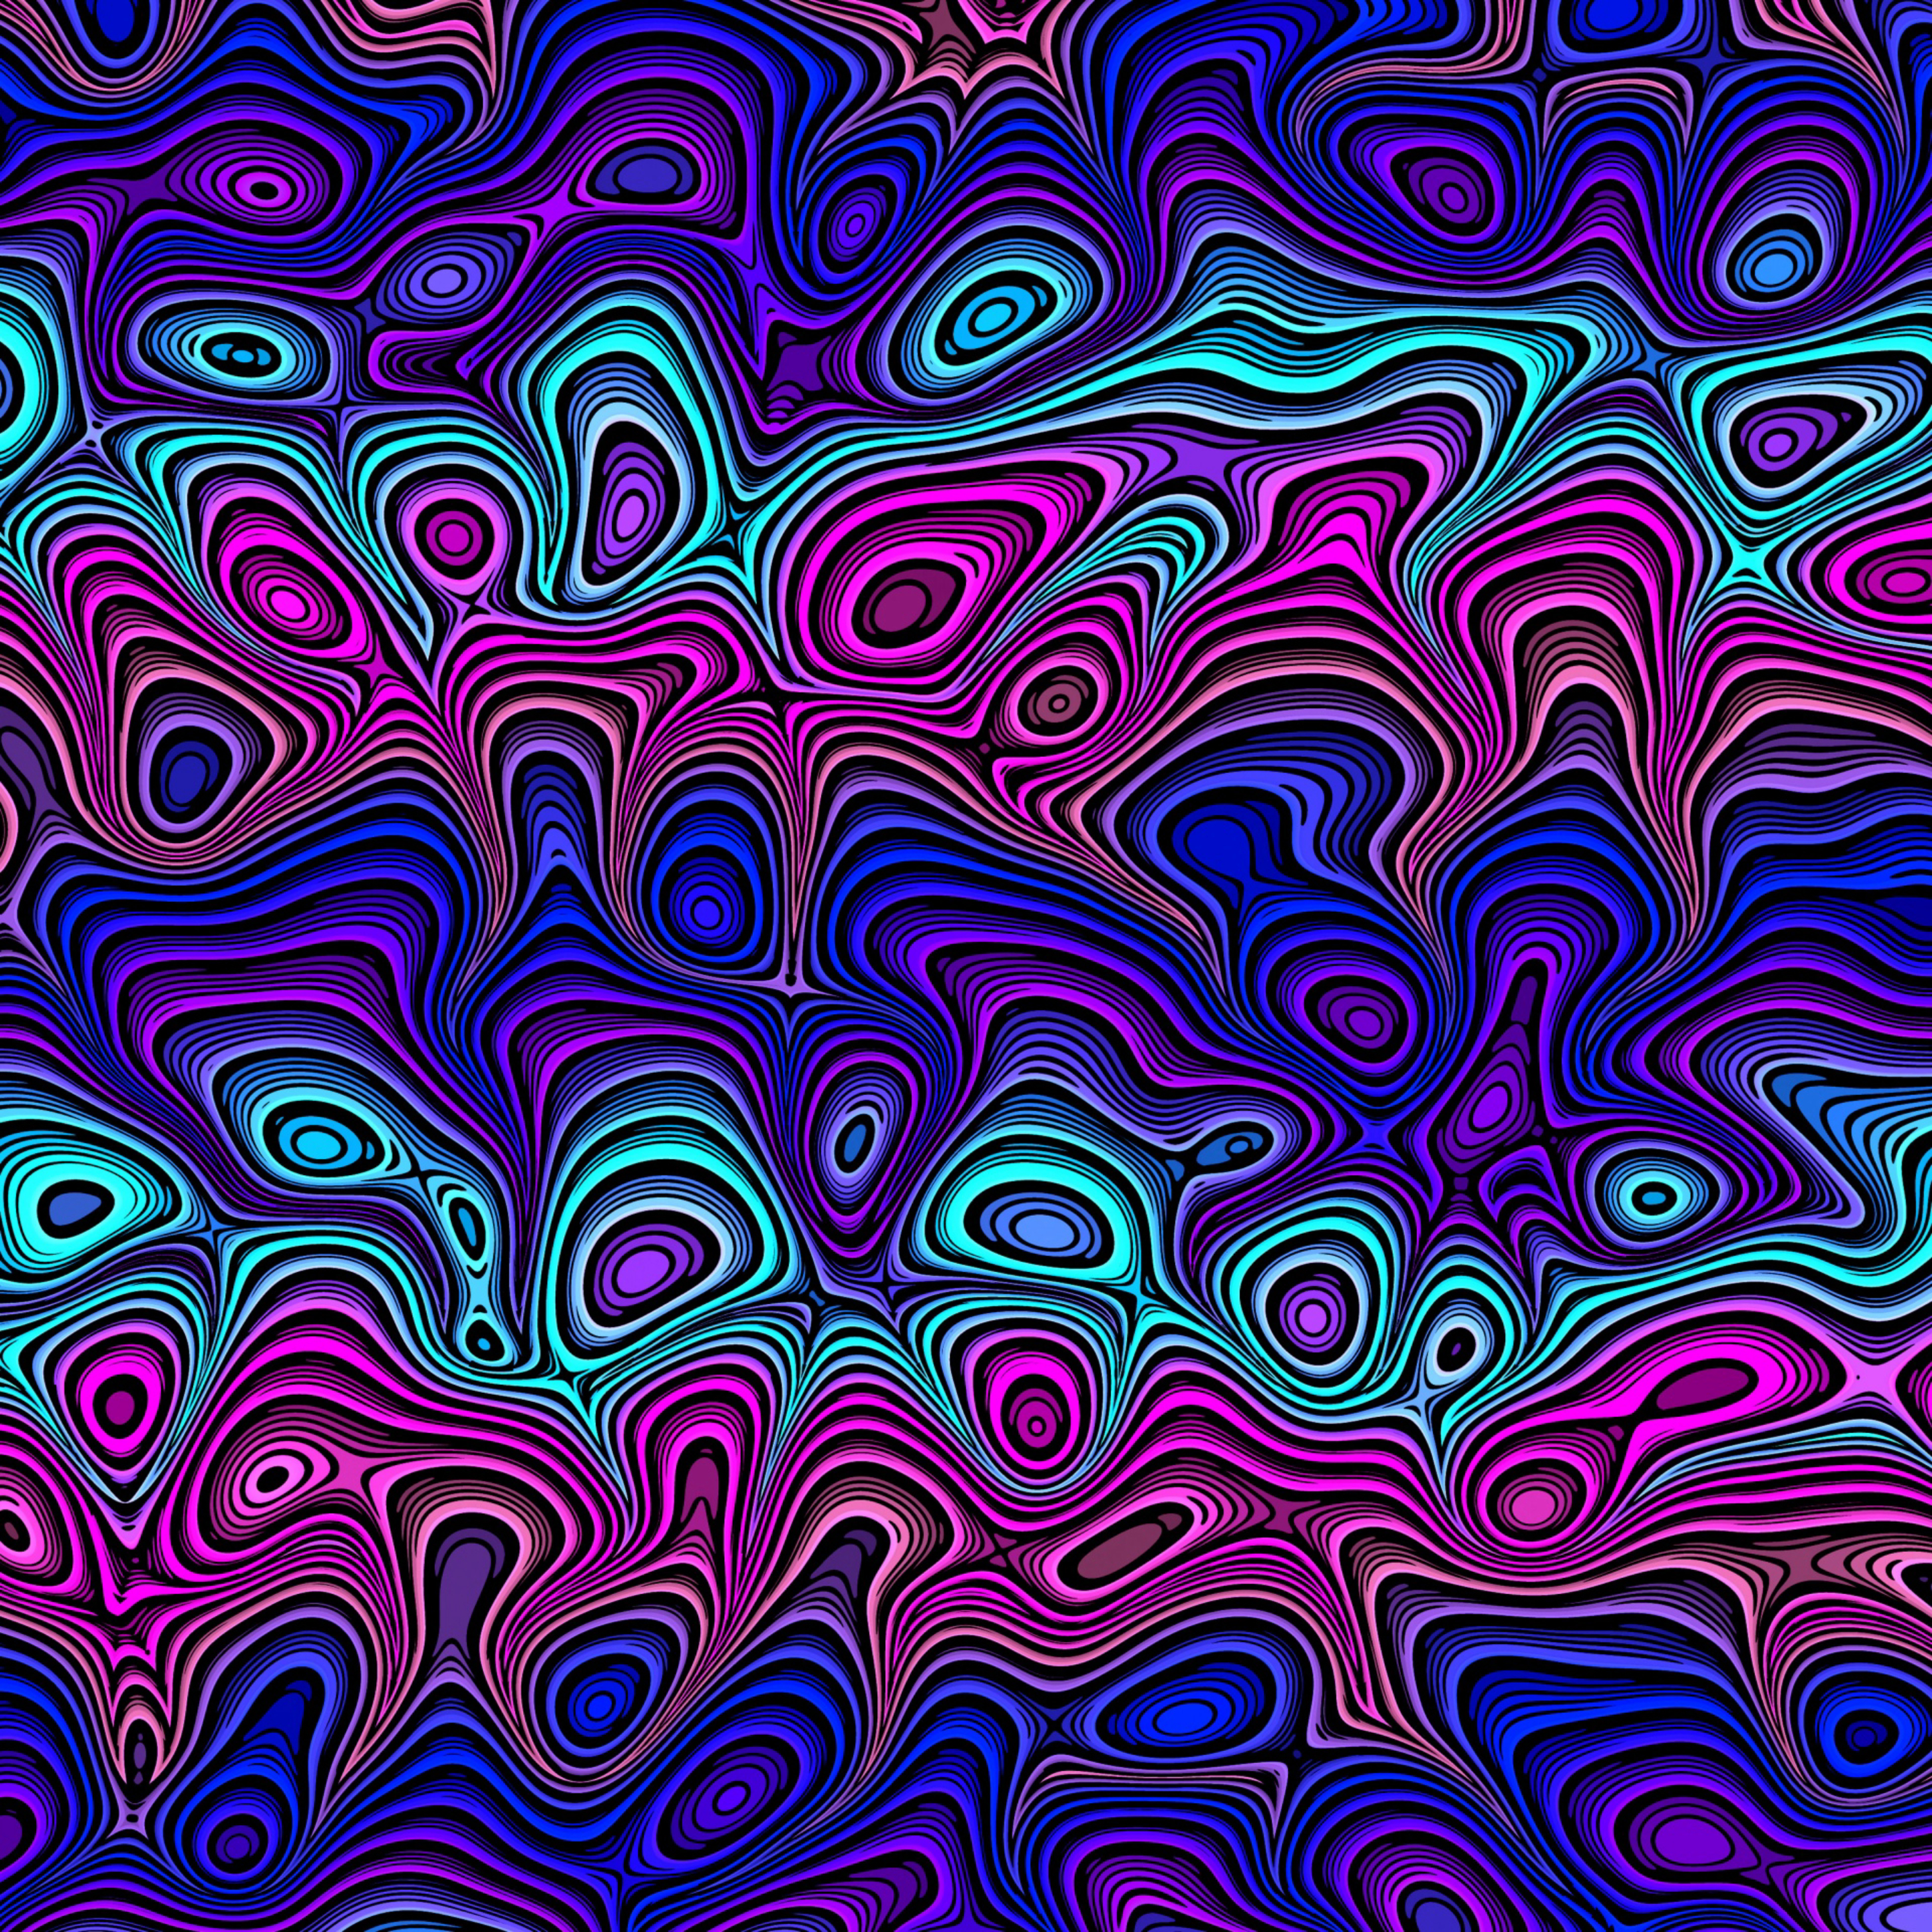 involute, wavy, motley, lines, multicolored, abstract, swirling